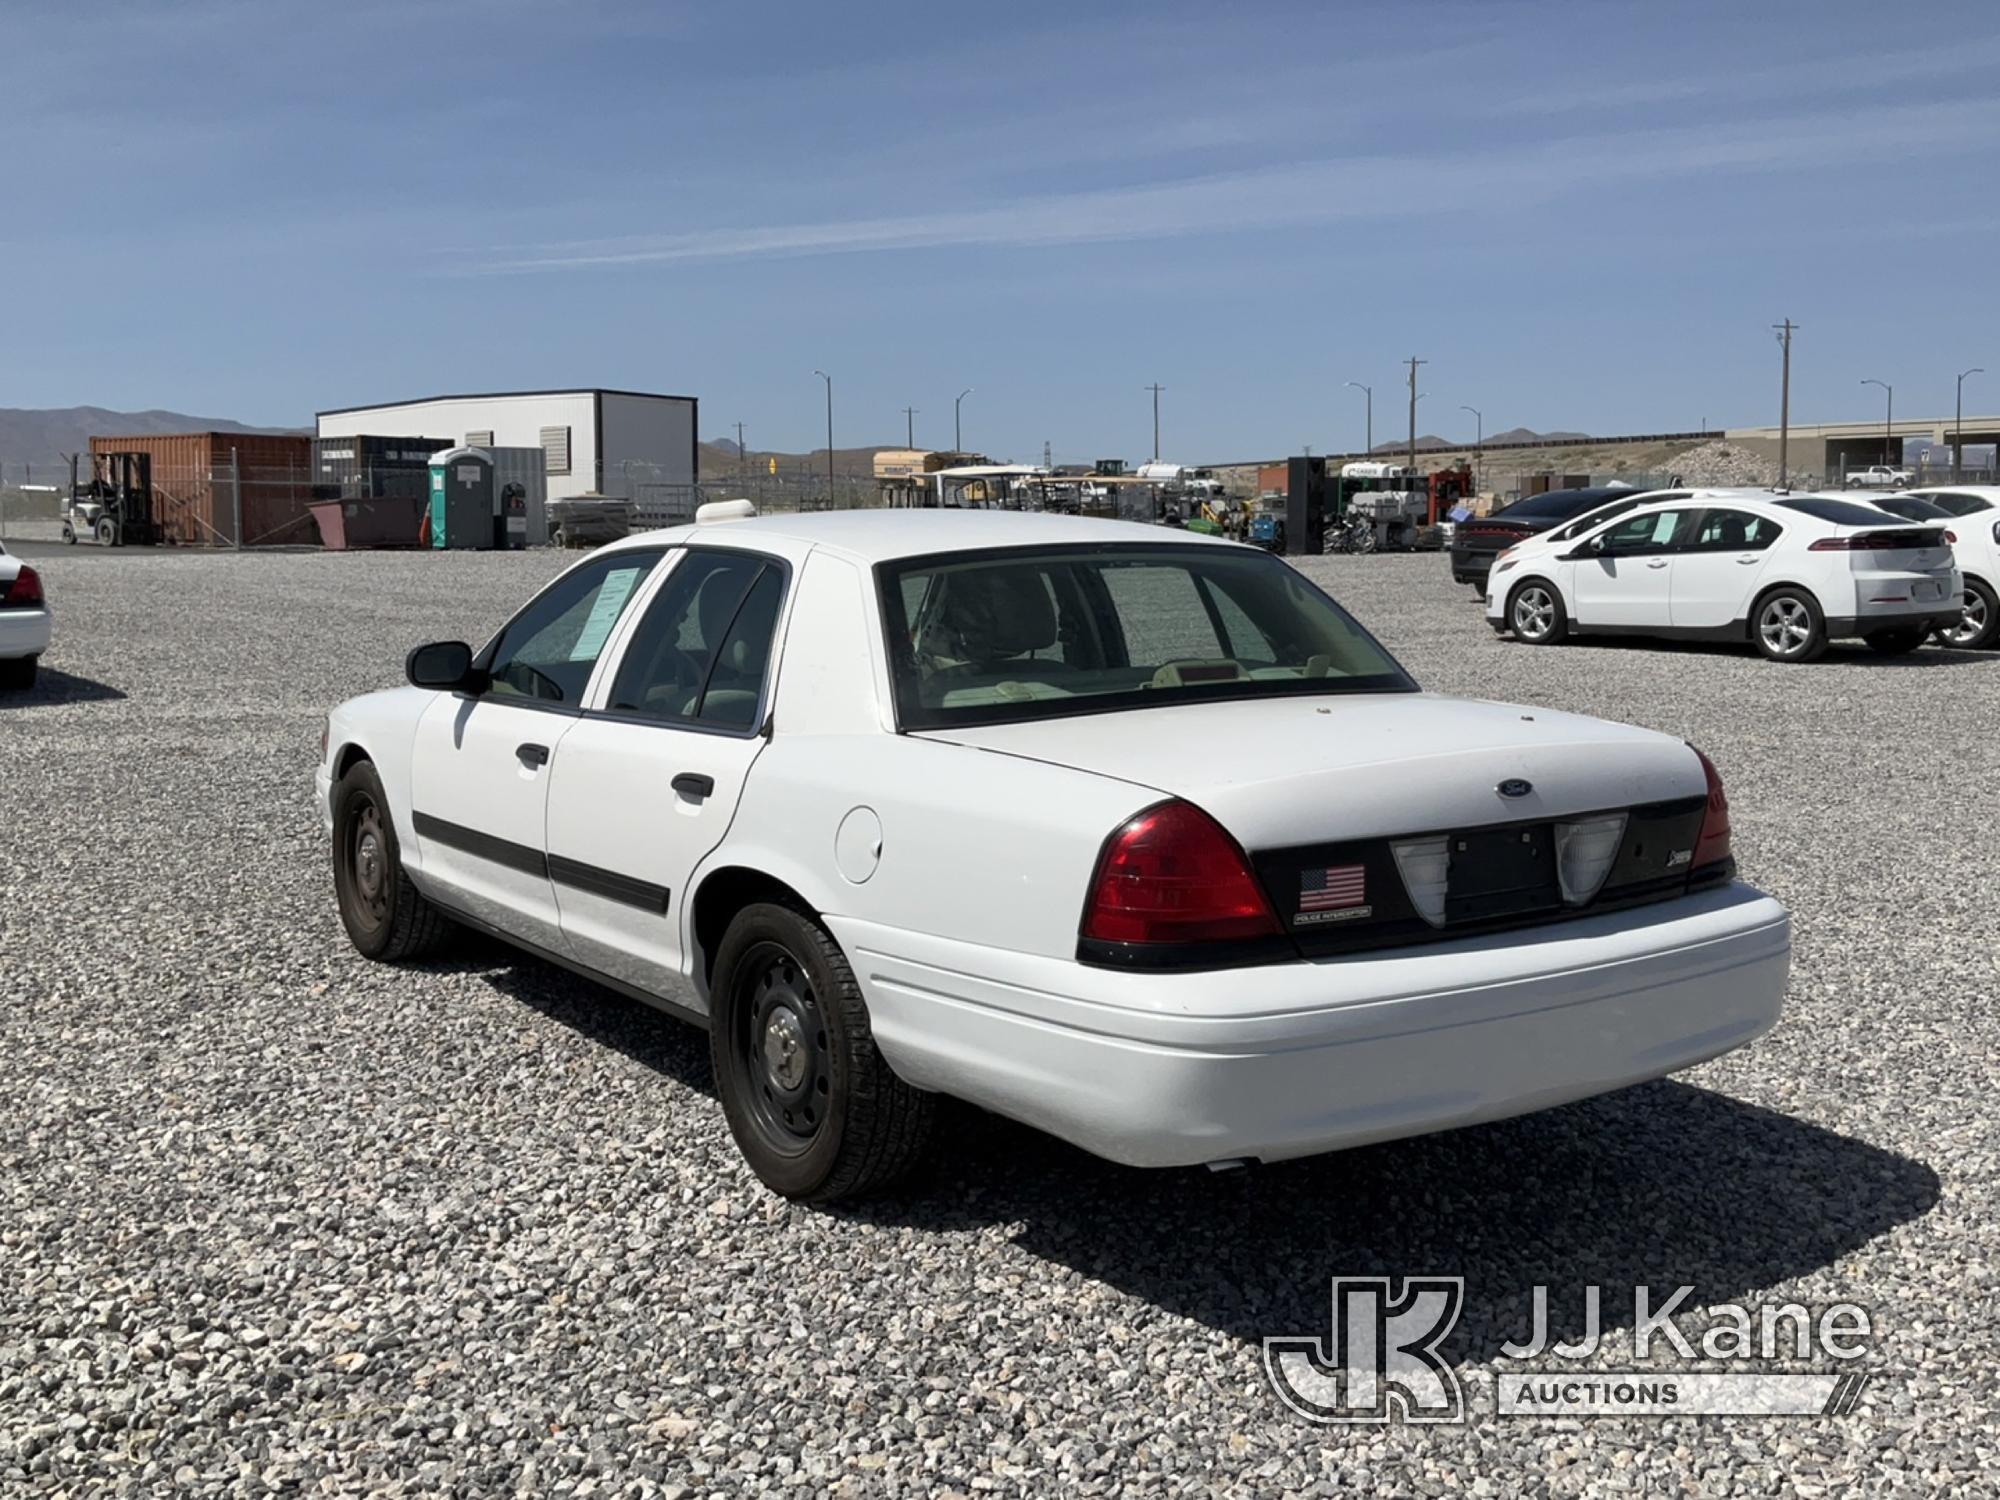 (Las Vegas, NV) 2011 Ford Crown Victoria Police Interceptor Towed In, Transmission Issue, Interior D